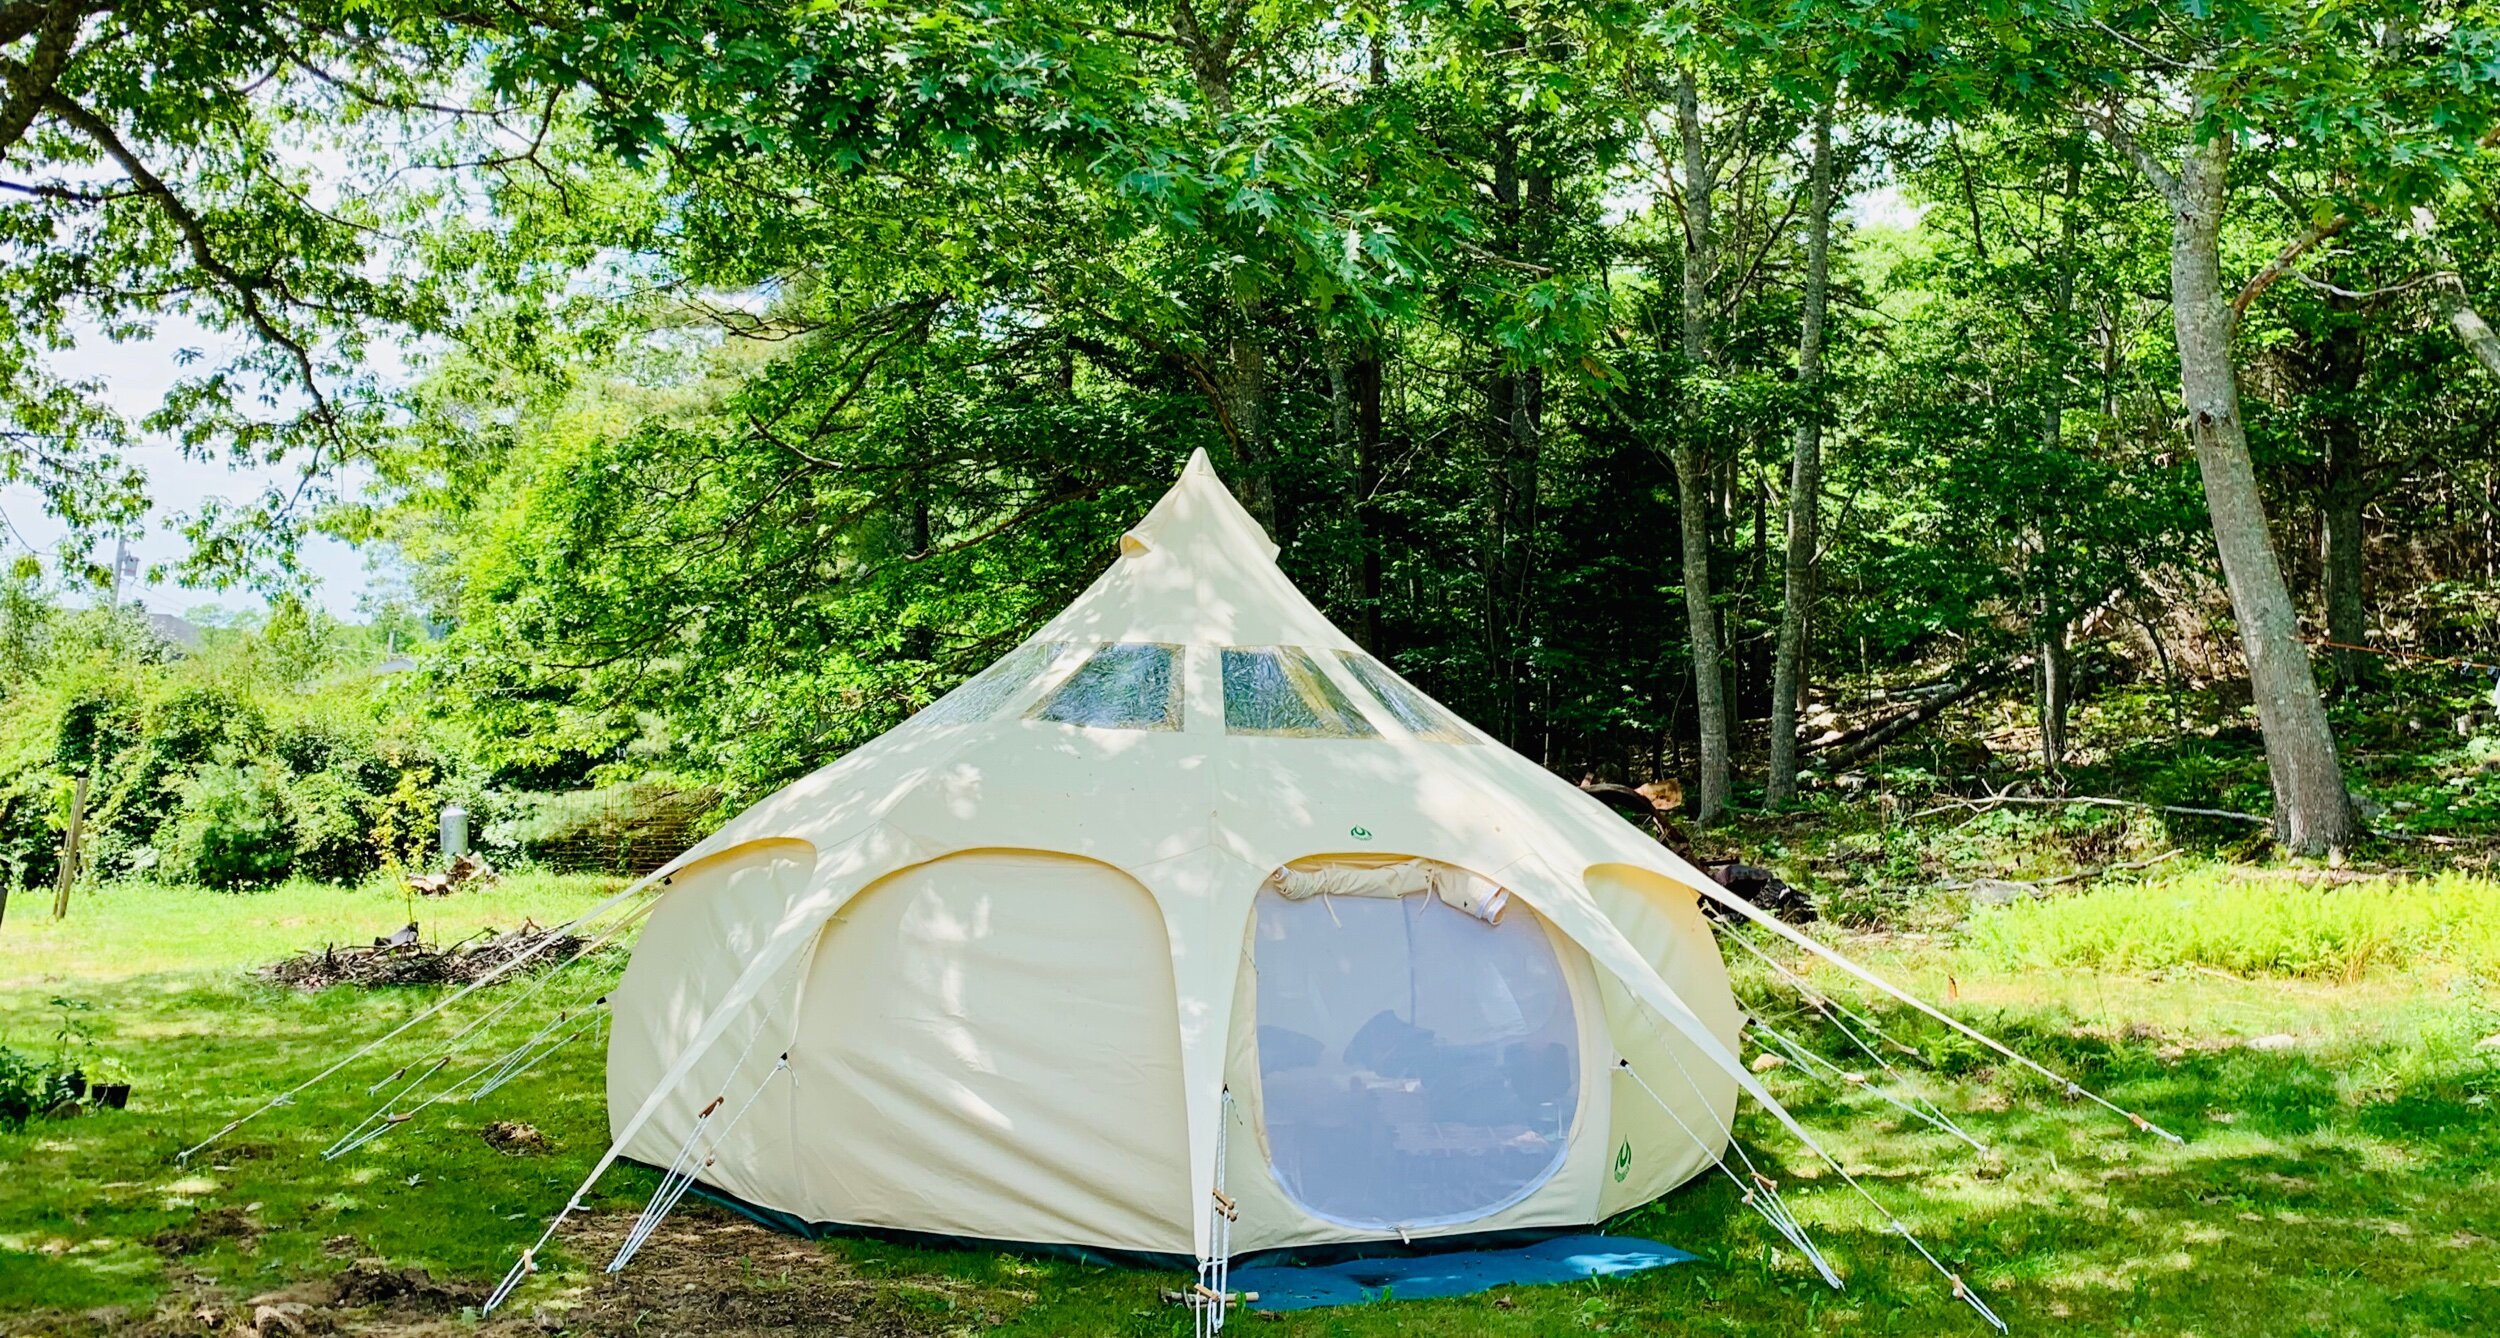 Our 18 ft “glamping” Lotus Belle Tent